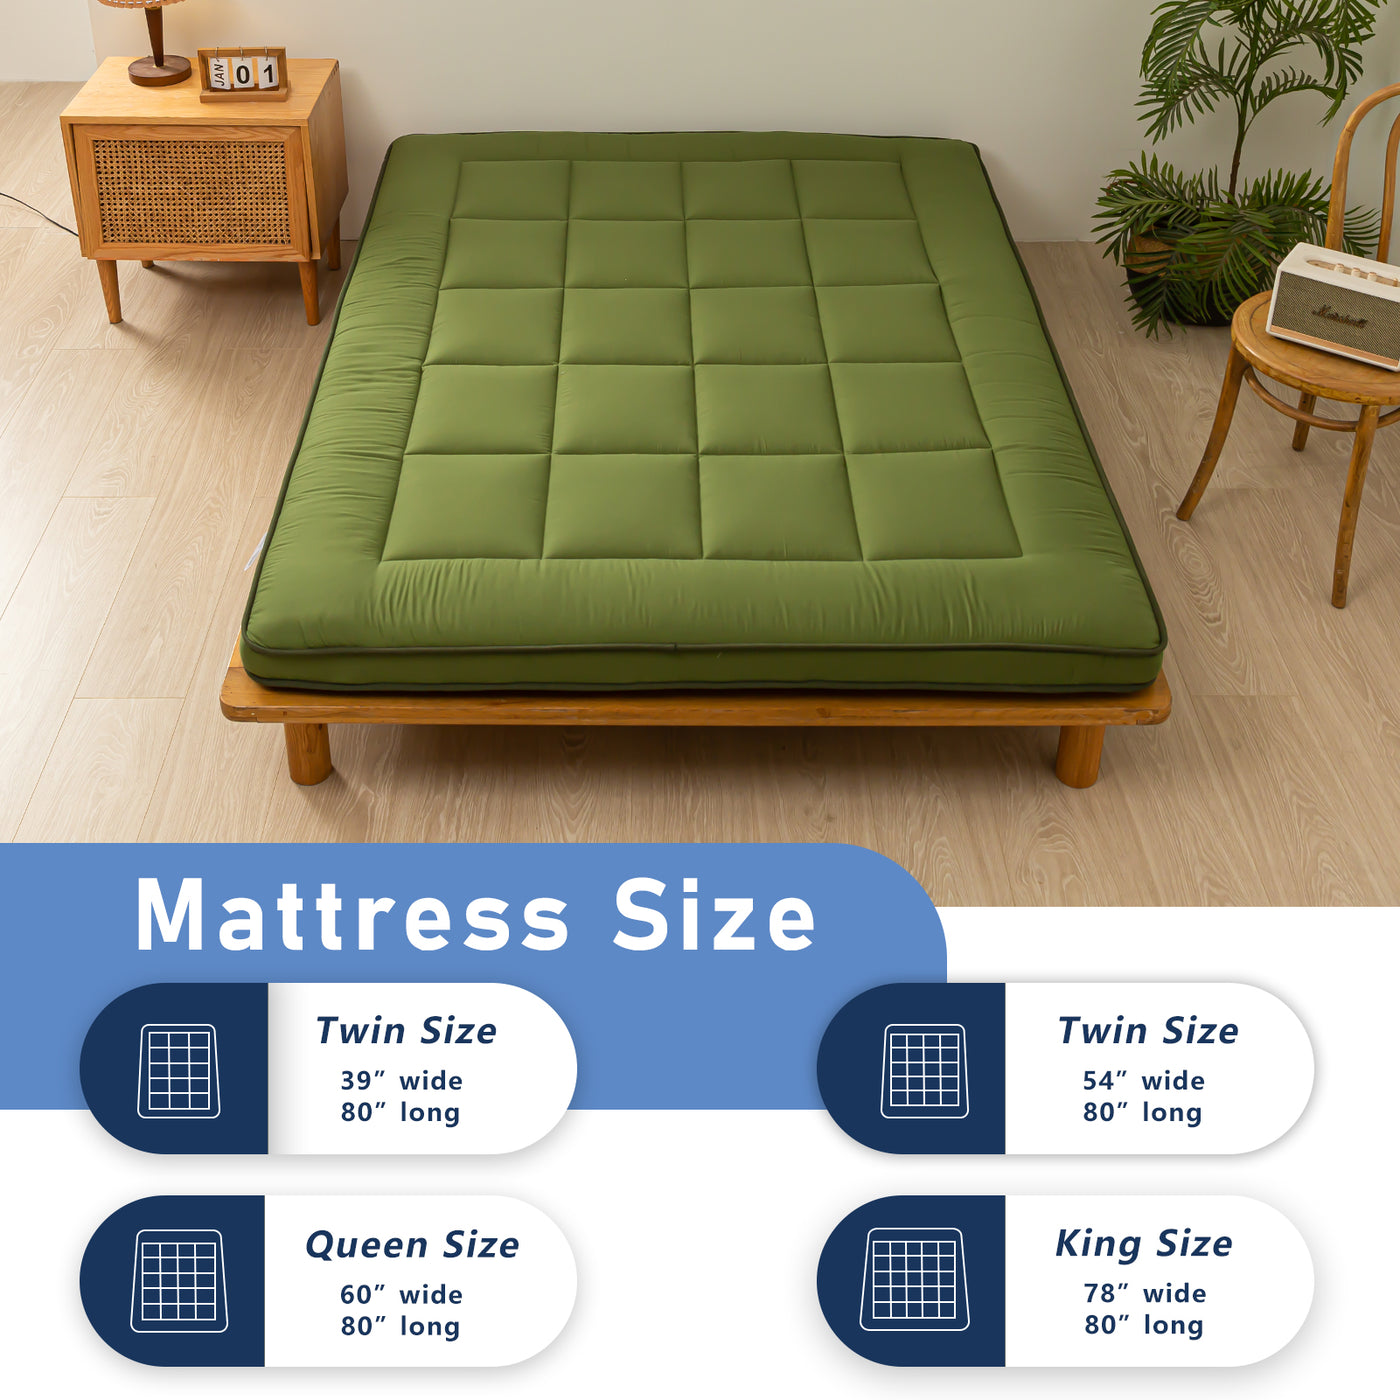 MAXYOYO Japanese Floor Mattress for Adults, 4" Thick Roll Up Floor Bed Futon Mattress Shikibuton, Green